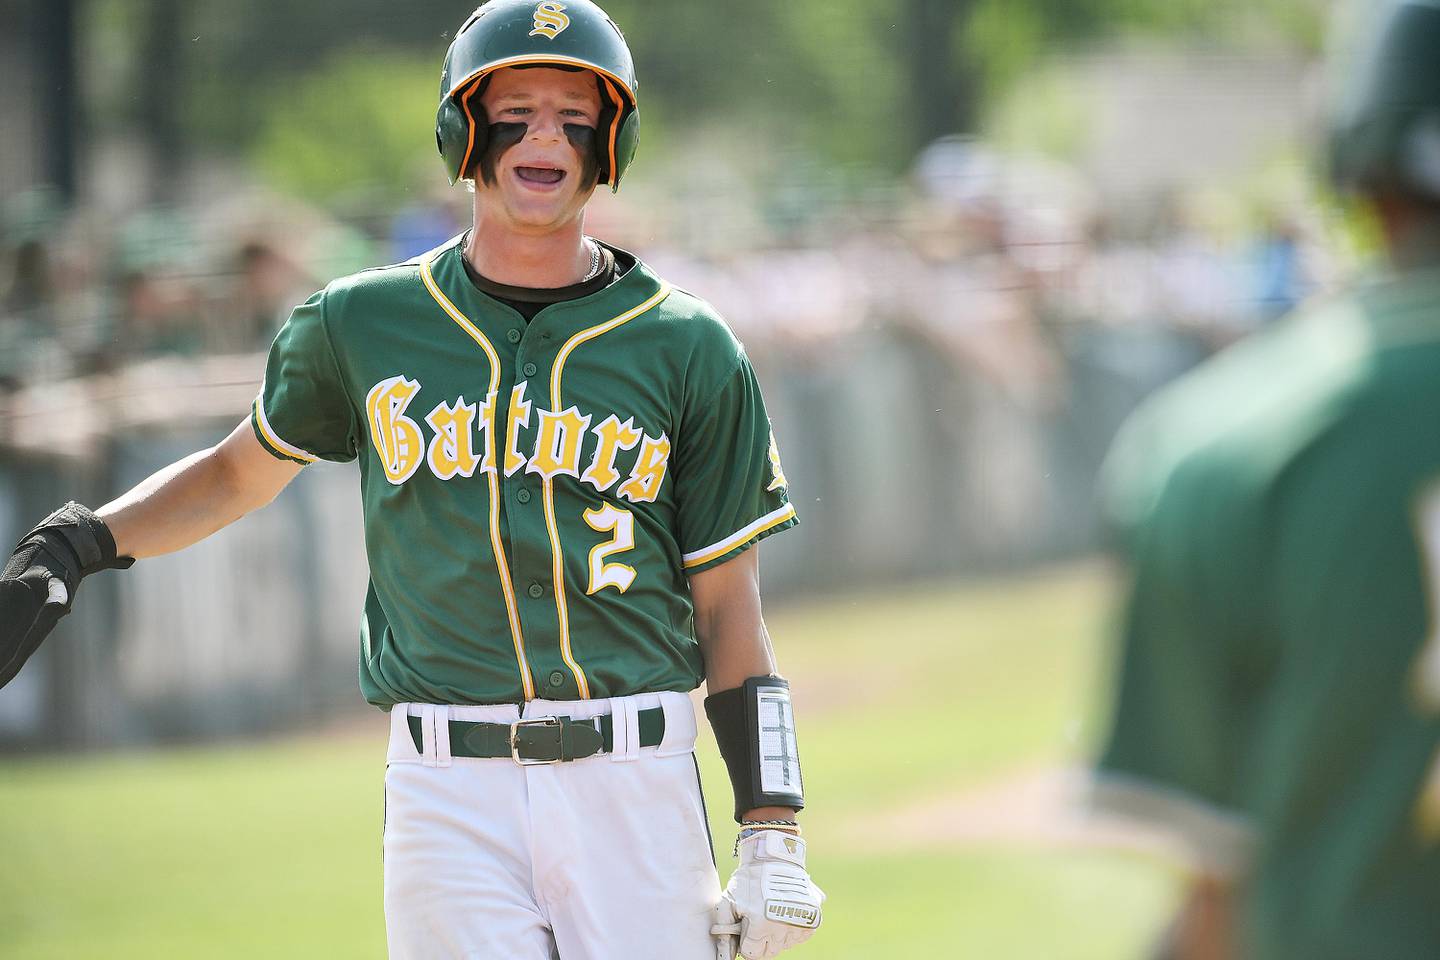 Crystal Lake South’s Ryan Skwarek reacts as he scores in the first inning against Grayslake Central in a 3A sectional semifinal baseball game in Grayslake on Thursday, June 1, 2023.